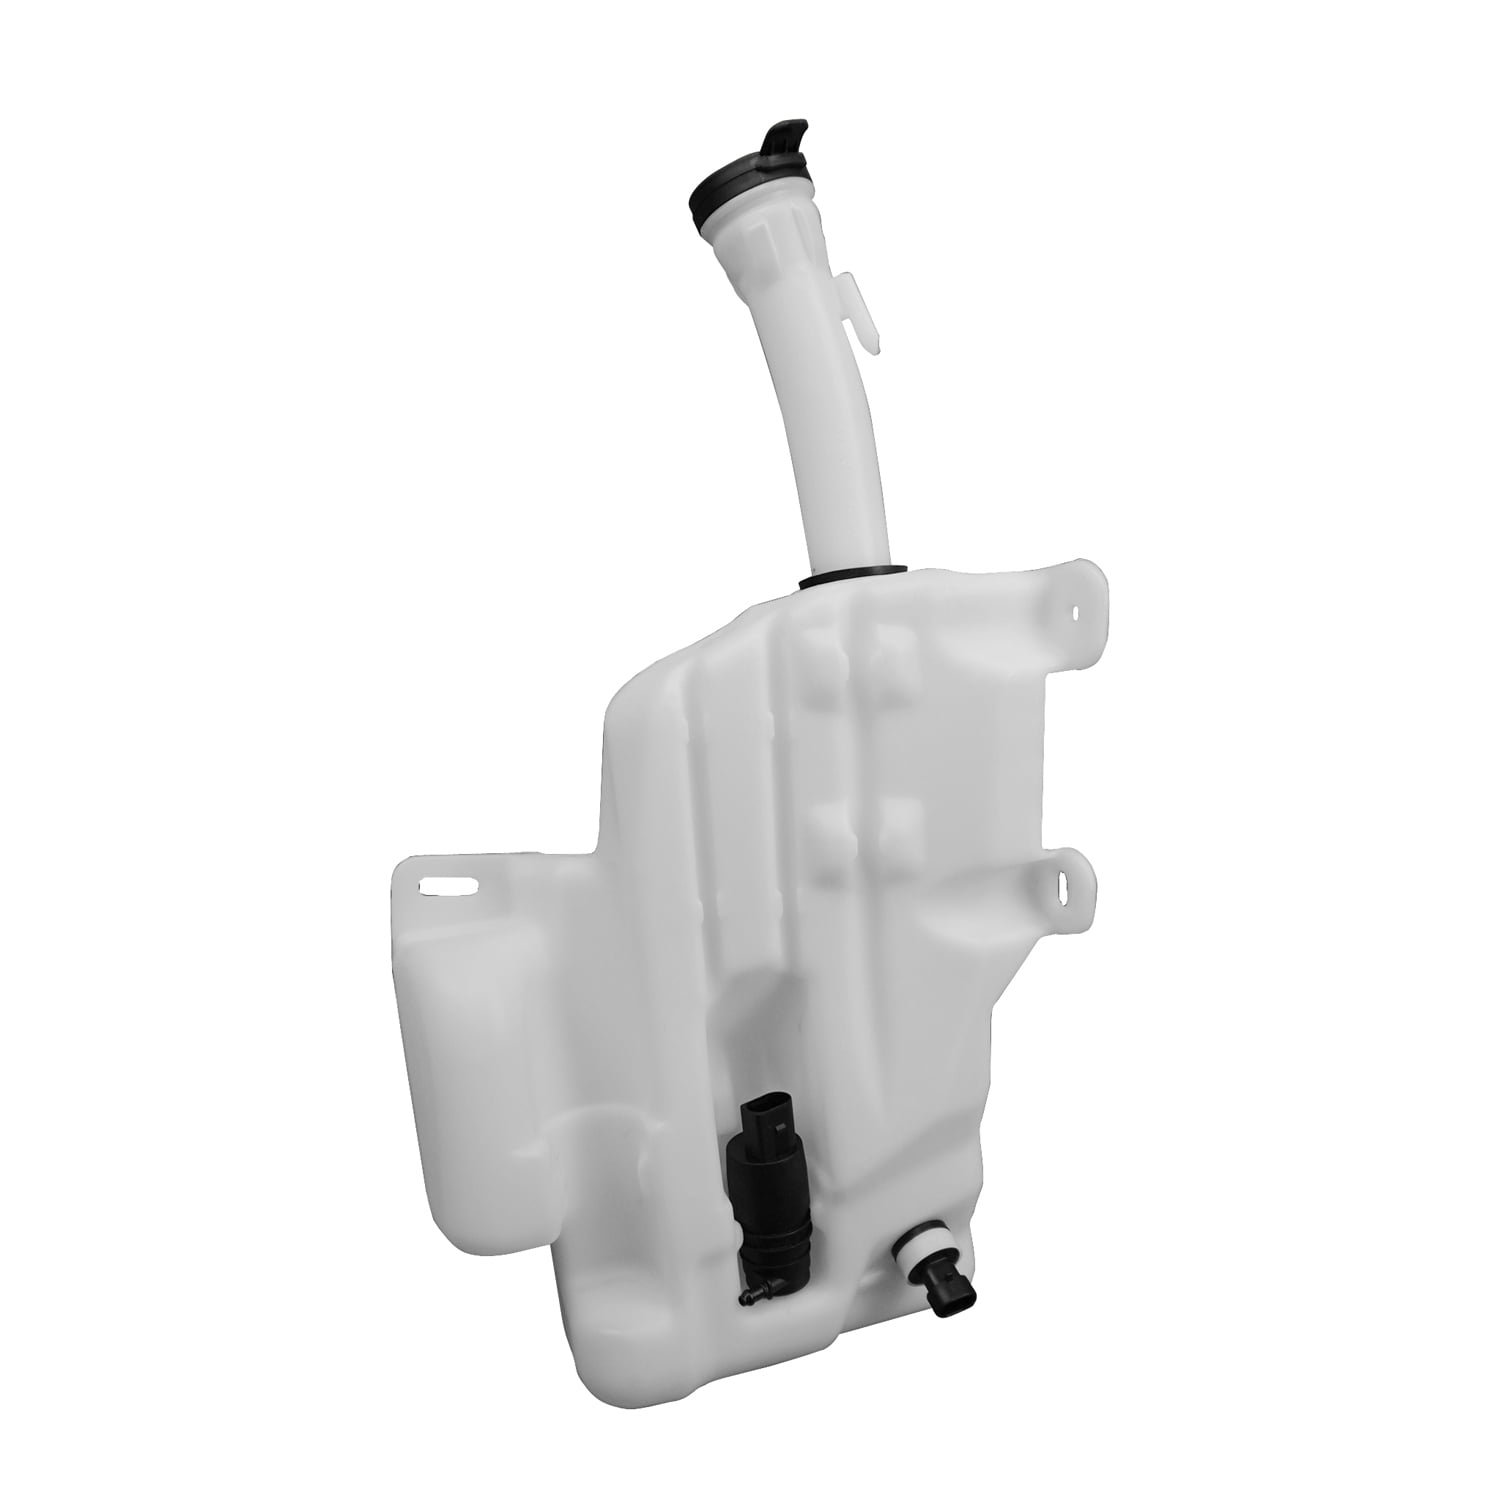 GO-PARTS Replacement for 2010 - 2018 Chevrolet (Chevy) Impala Windshield  Washer Fluid Tank / Reservoir Sedan 13311008 GM1288213 Replacement For  Chevrolet Impala 